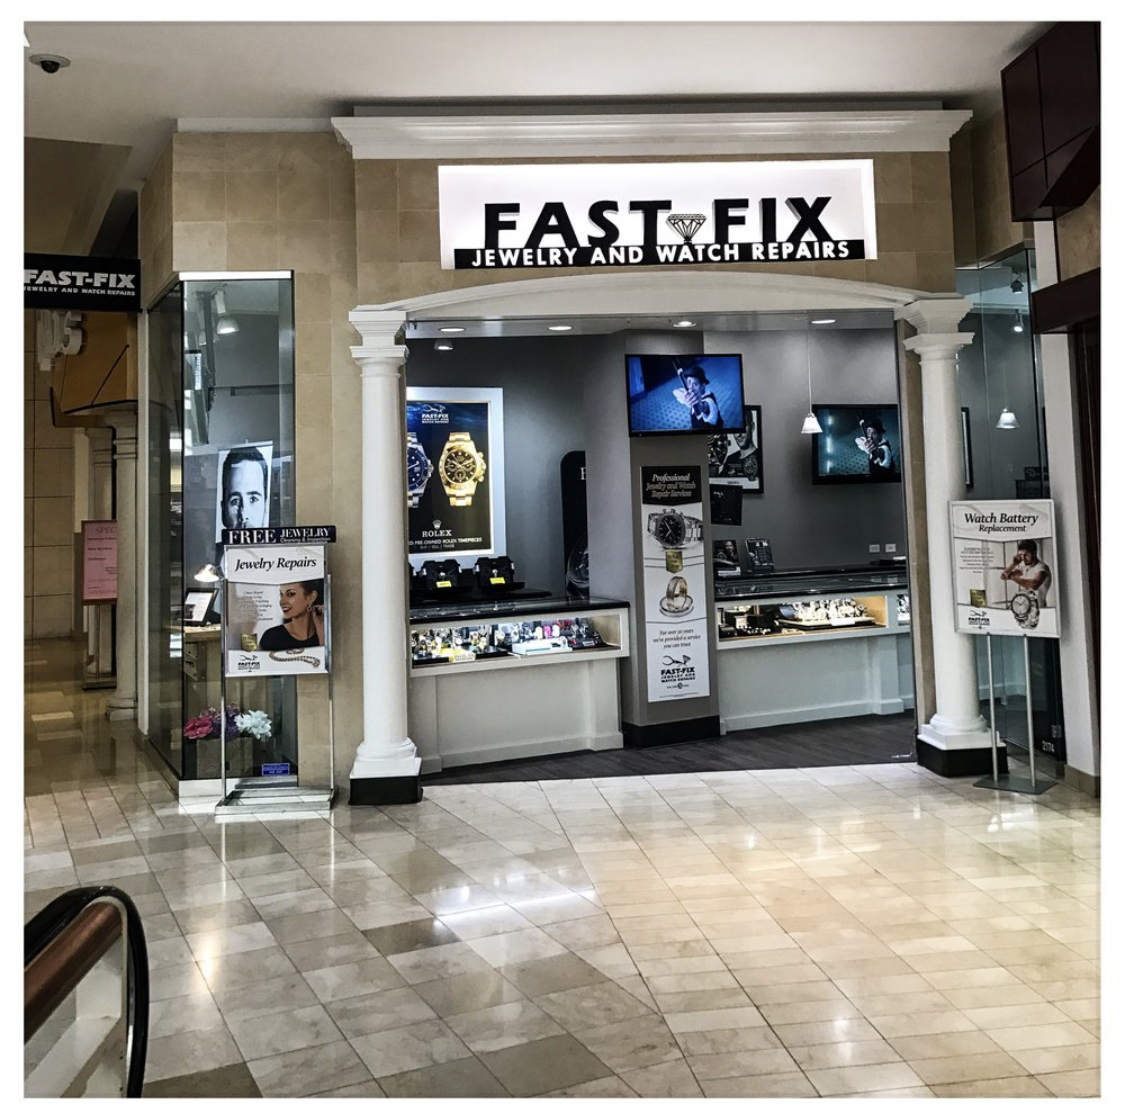 Ross Park Mall | Fast-Fix Jewelry and Watch Repairs